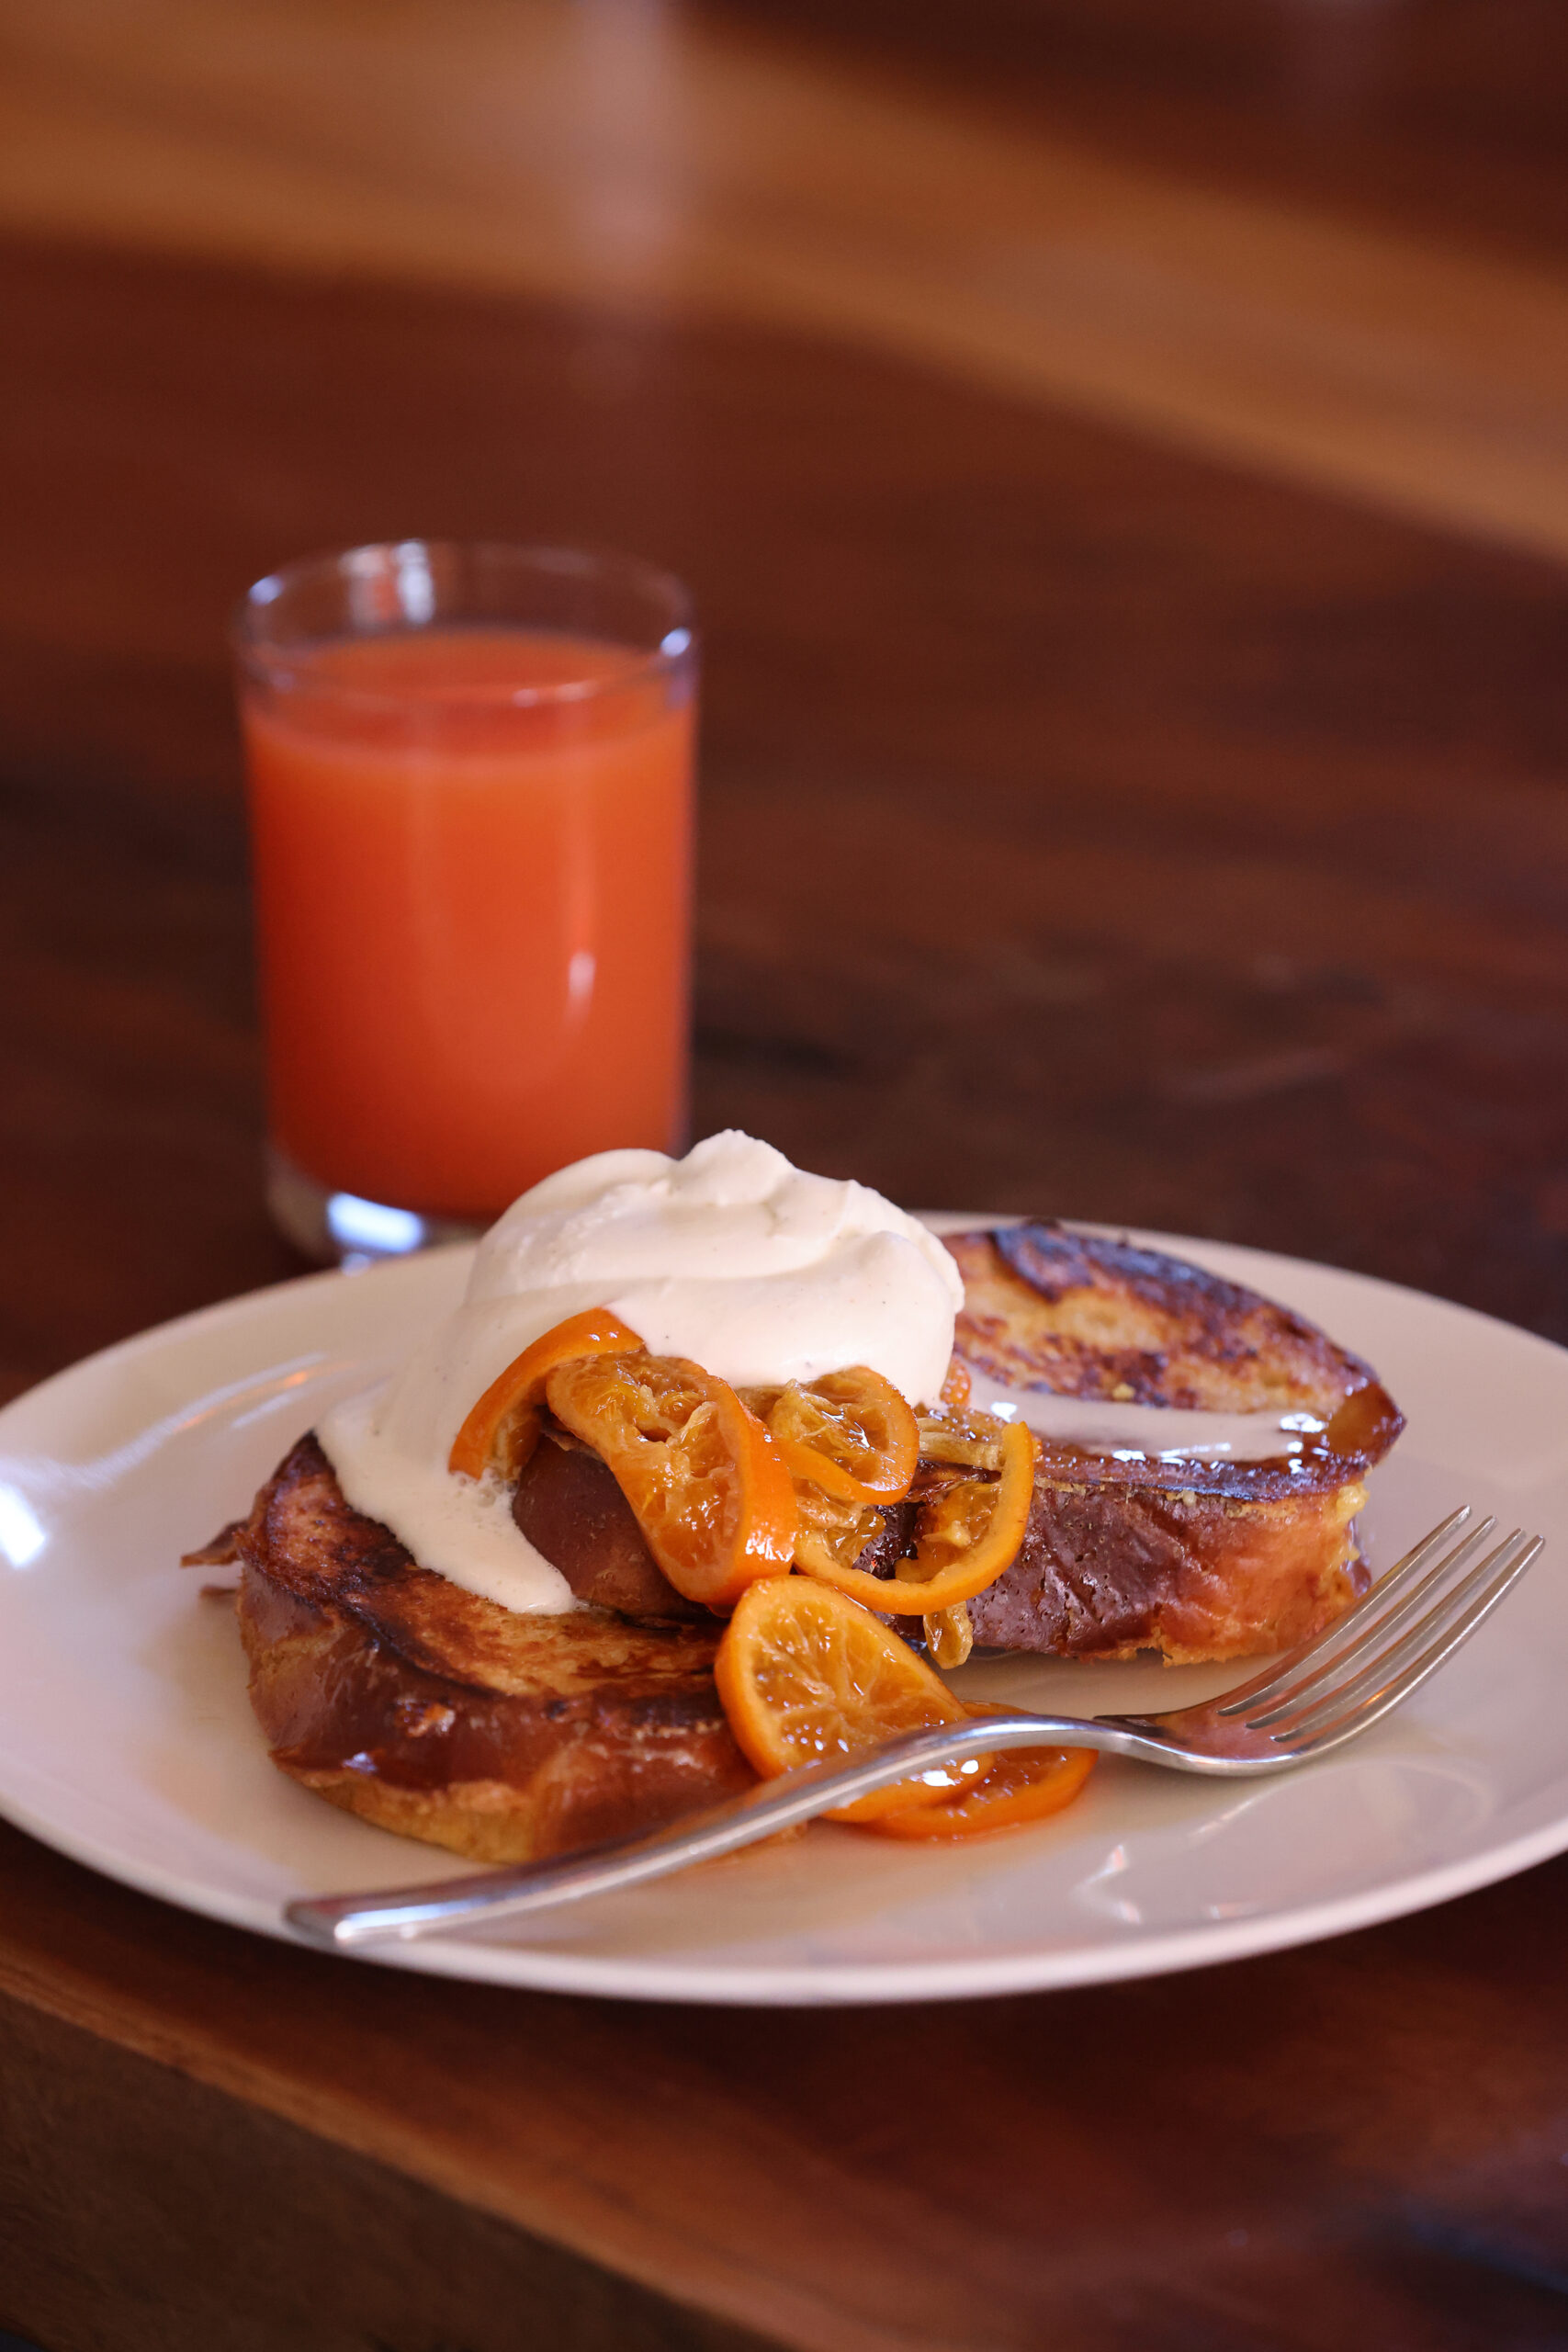 Challah French toast topped with clementine marmalade and sweeter creme fraiche at Marla Bakery, a pop-up weekend brunch spot, at the Spinster Sisters restaurant in Santa Rosa, Calif., on Sunday, March 20, 2022. (Beth Schlanker/The Press Democrat)